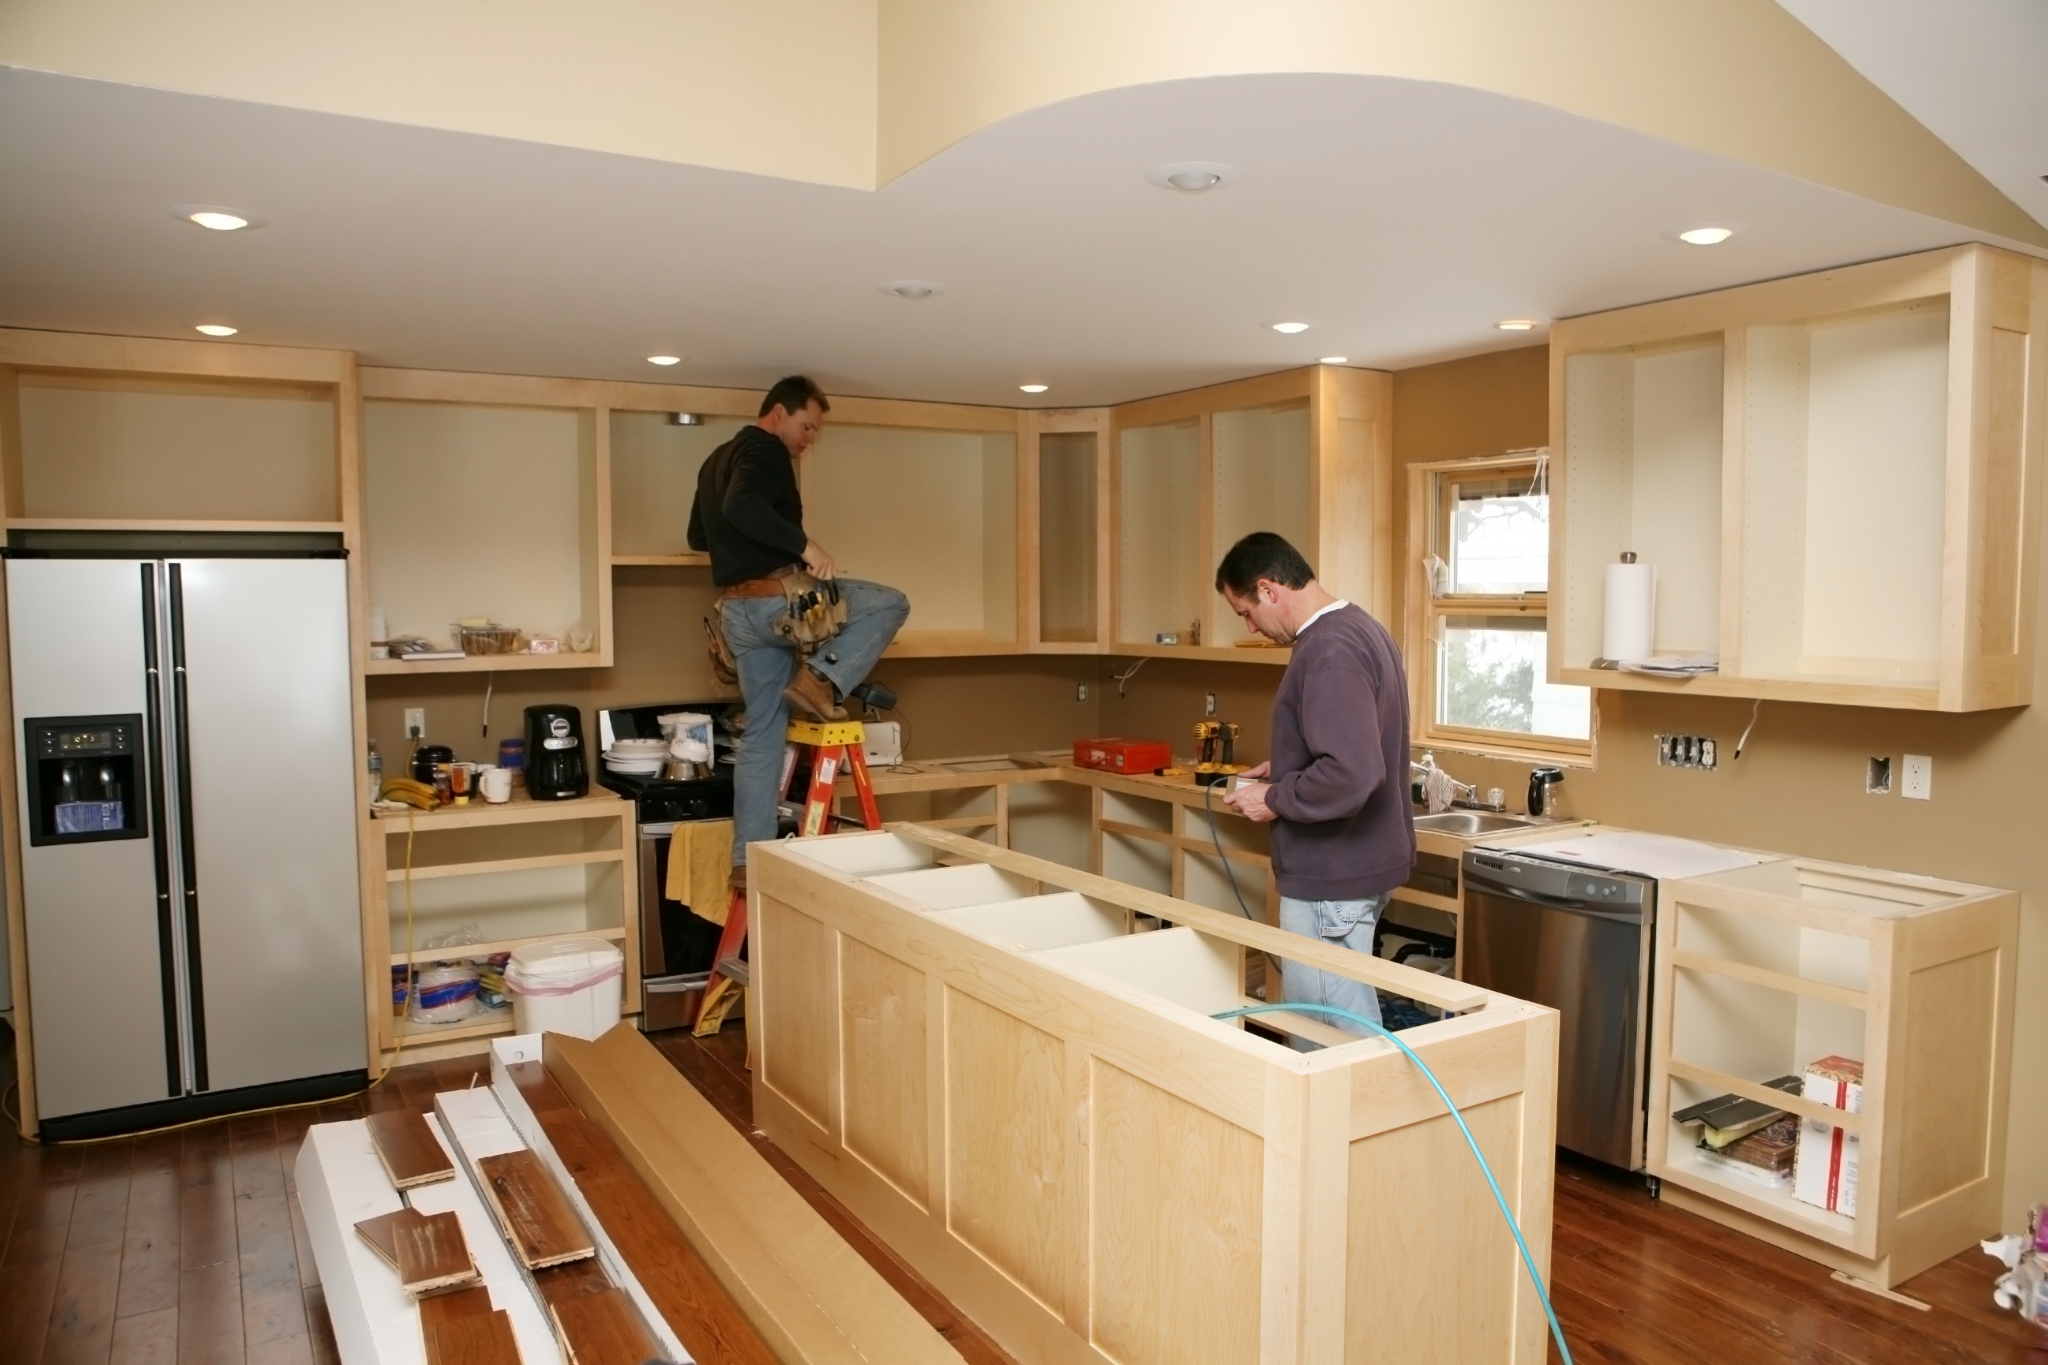 Removing old or worn cabinets from a kitchen or other area and installing new ones.